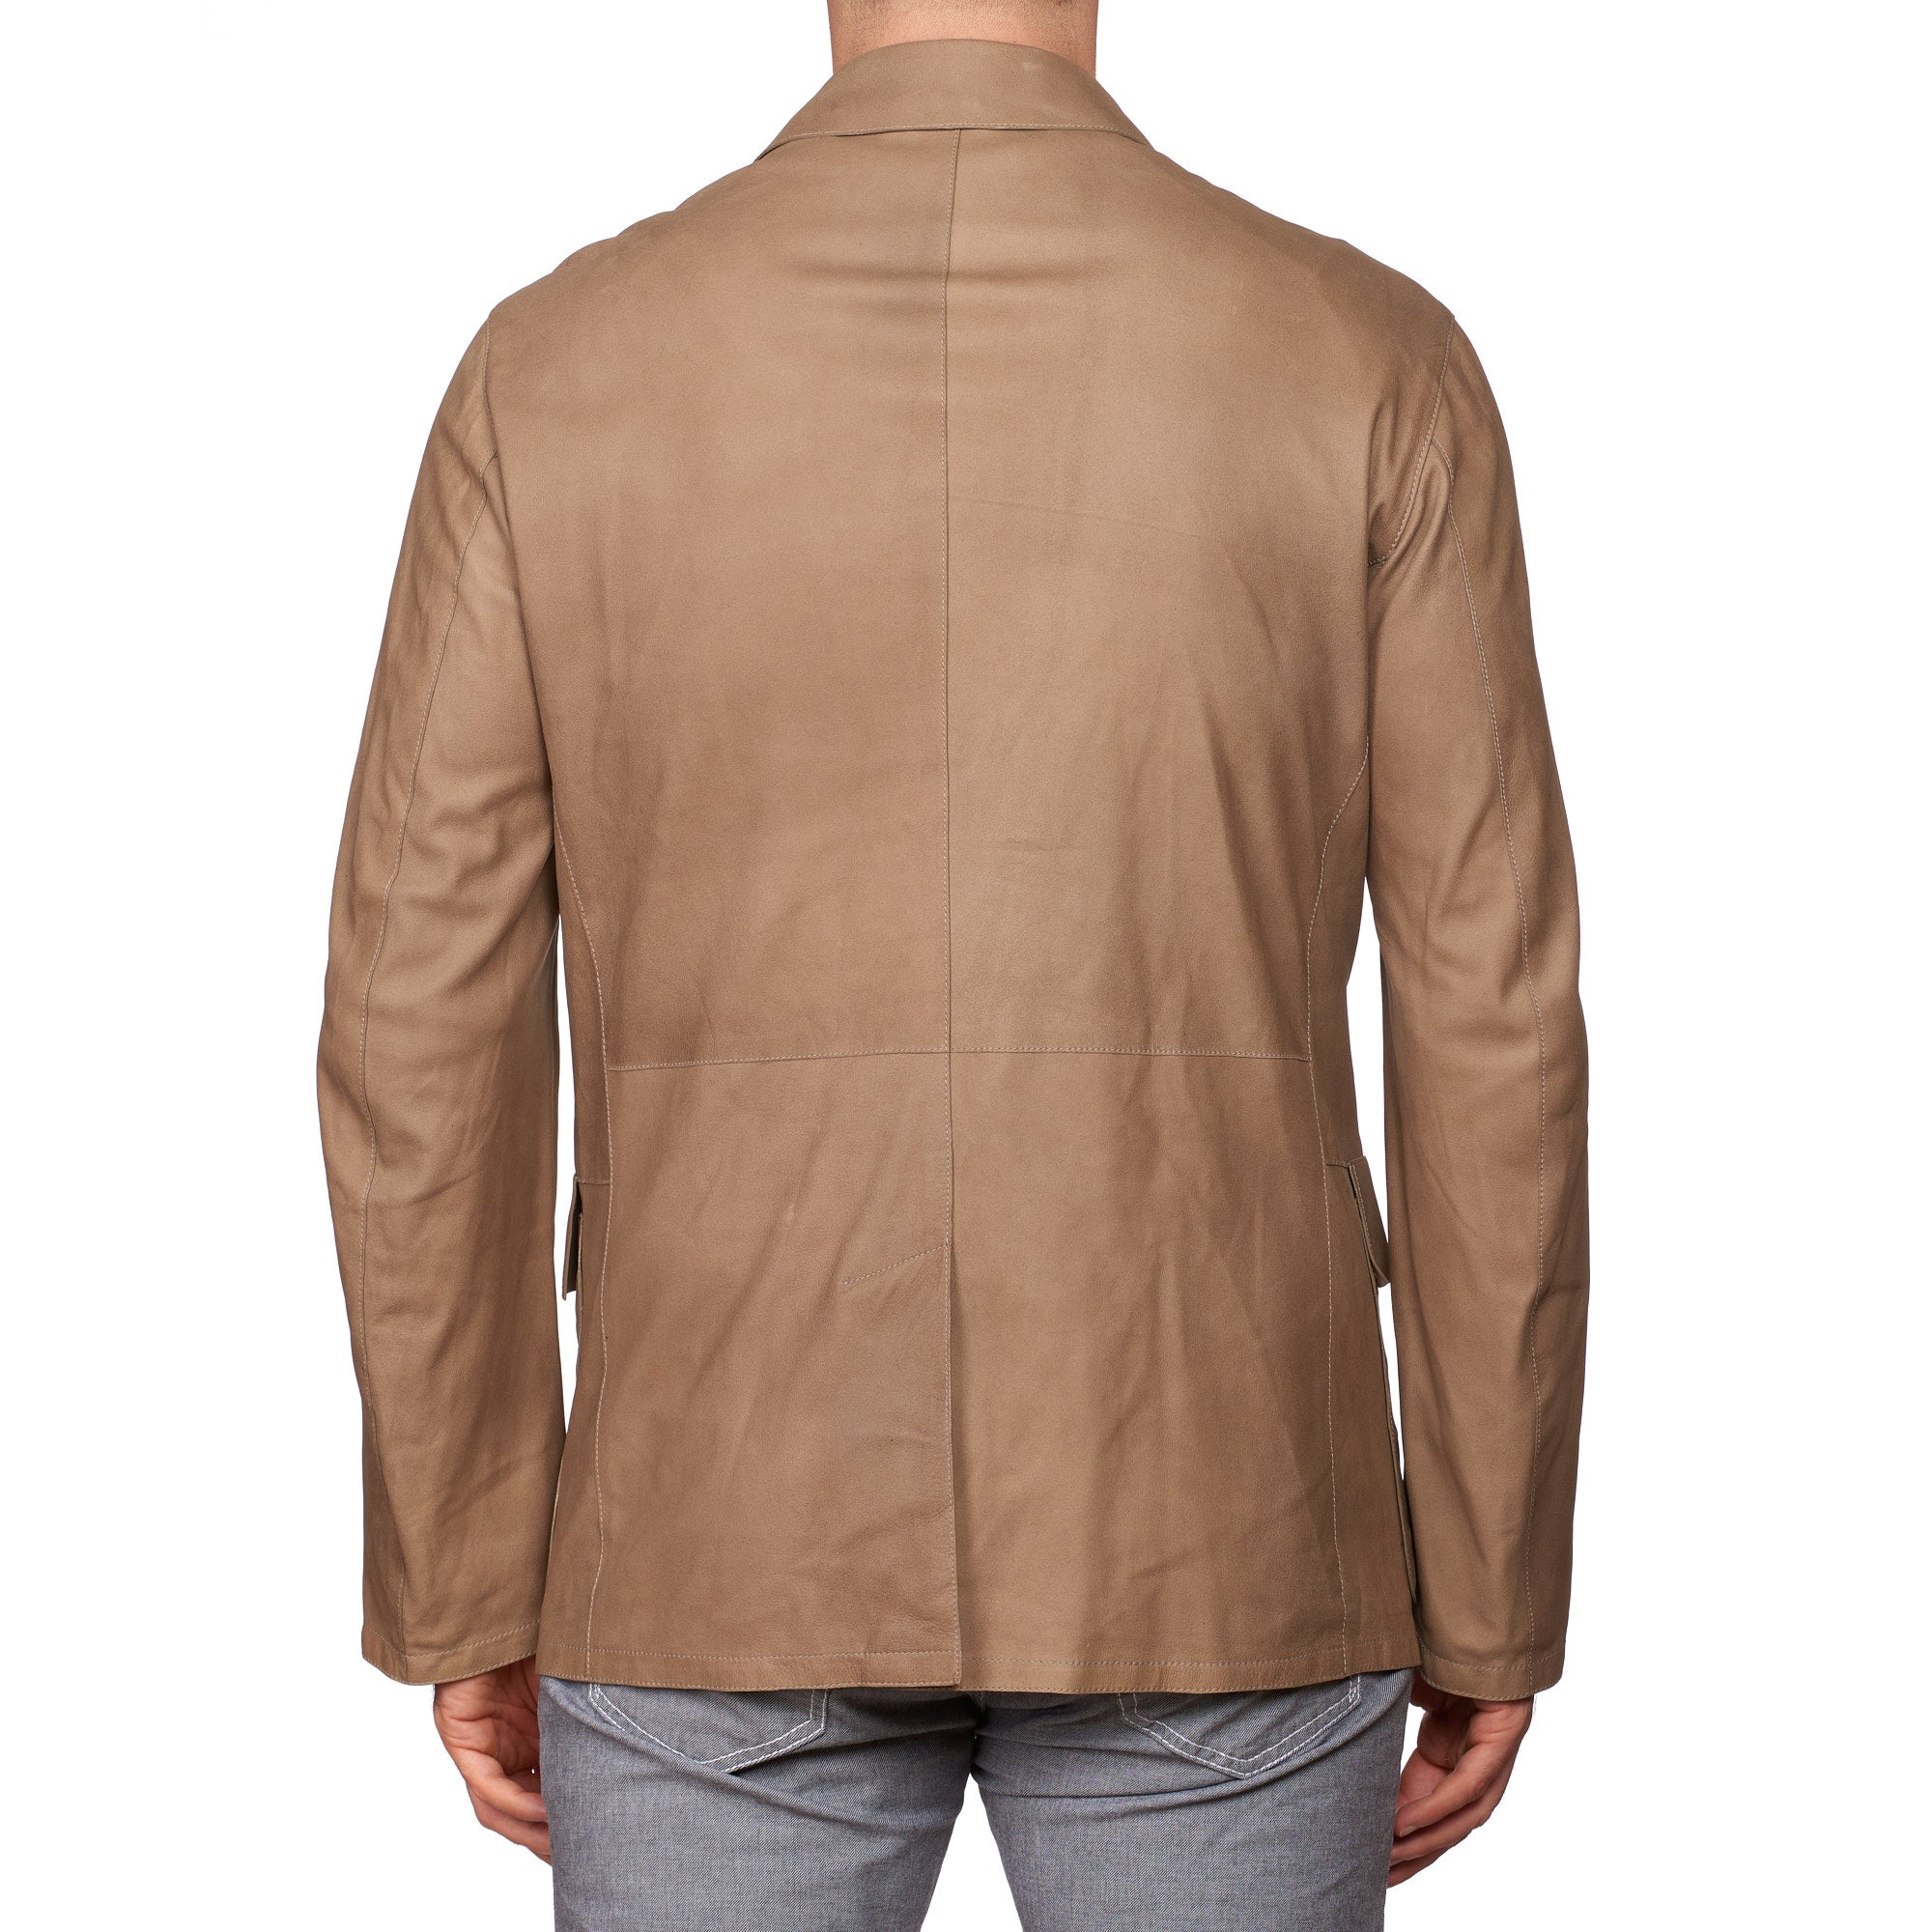 SERAPHIN Tan Suede Goat Leather Unlined Field Jacket FR 50 US M NEW SERAPHIN